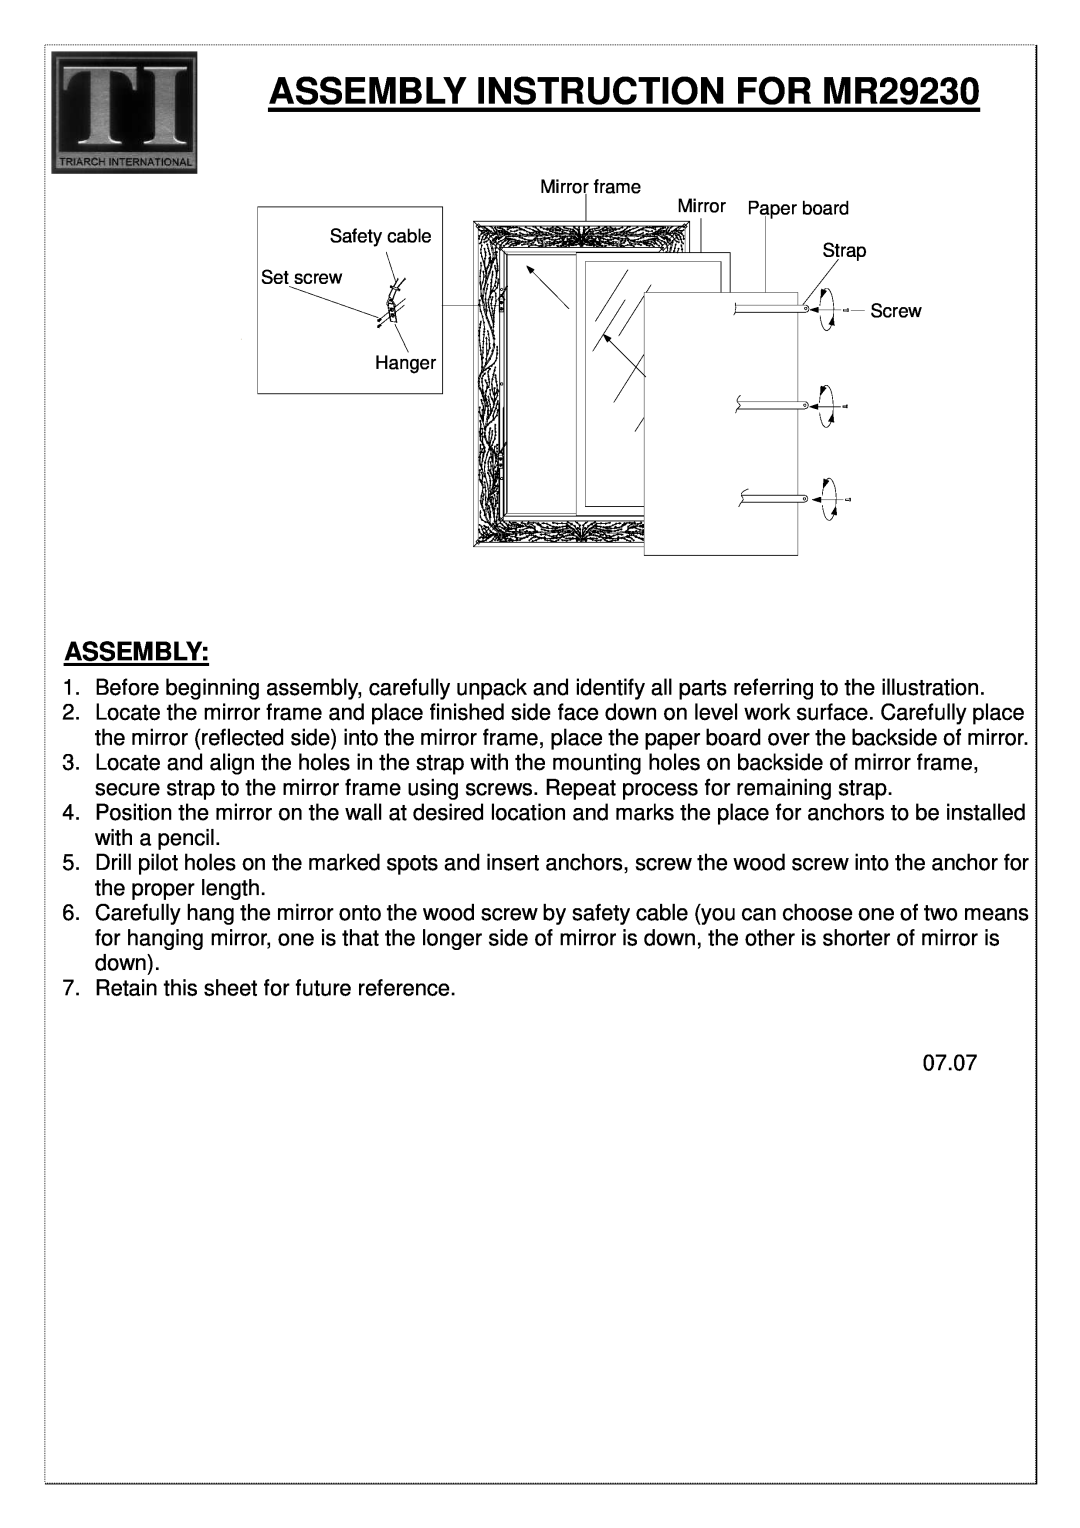 Triarch manual ASSEMBLY INSTRUCTION FOR MR29230, Assembly 